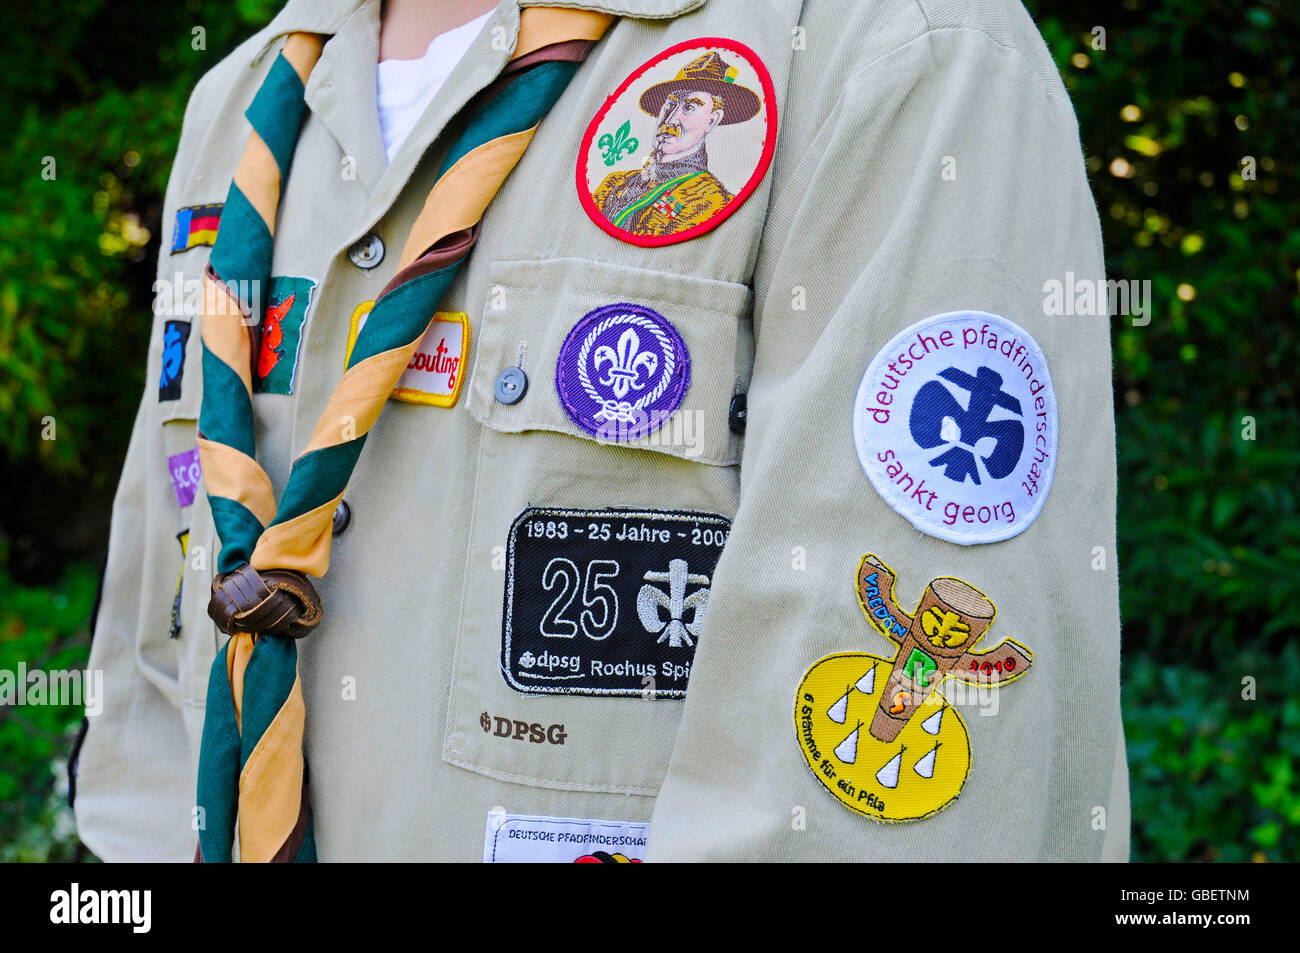 Boy, 13 years, shirt, scarf, gear, badges, Boy Scout, Germany Stock Photo